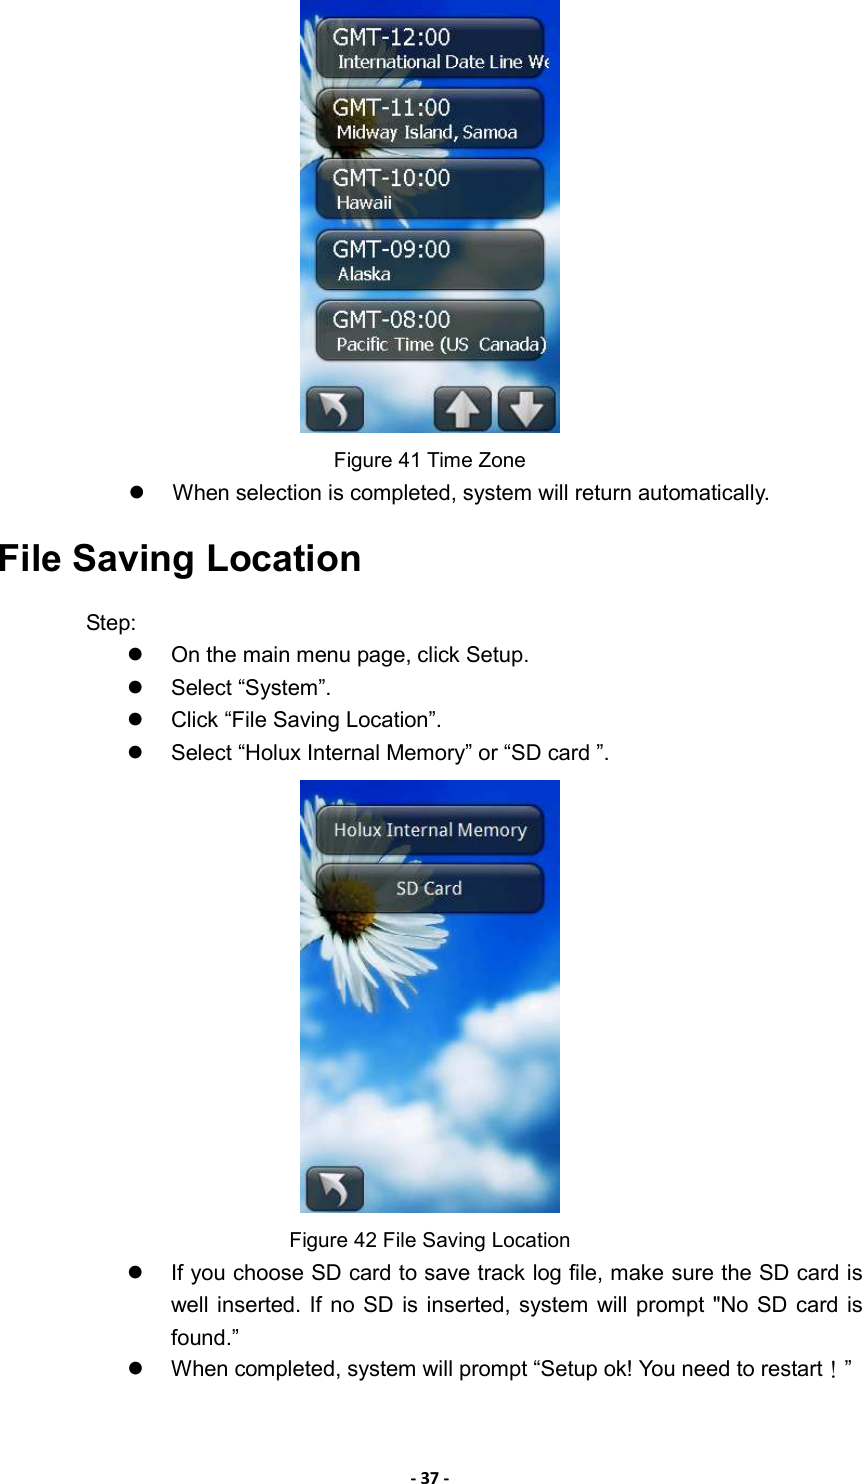 - 37 -  Figure 41 Time Zone   When selection is completed, system will return automatically. File Saving Location Step:   On the main menu page, click Setup.   Select “System”.   Click “File Saving Location”.   Select “Holux Internal Memory” or “SD card ”.    Figure 42 File Saving Location   If you choose SD card to save track log file, make sure the SD card is well inserted. If  no  SD is inserted, system  will prompt &quot;No SD  card is found.”   When completed, system will prompt “Setup ok! You need to restart！”  